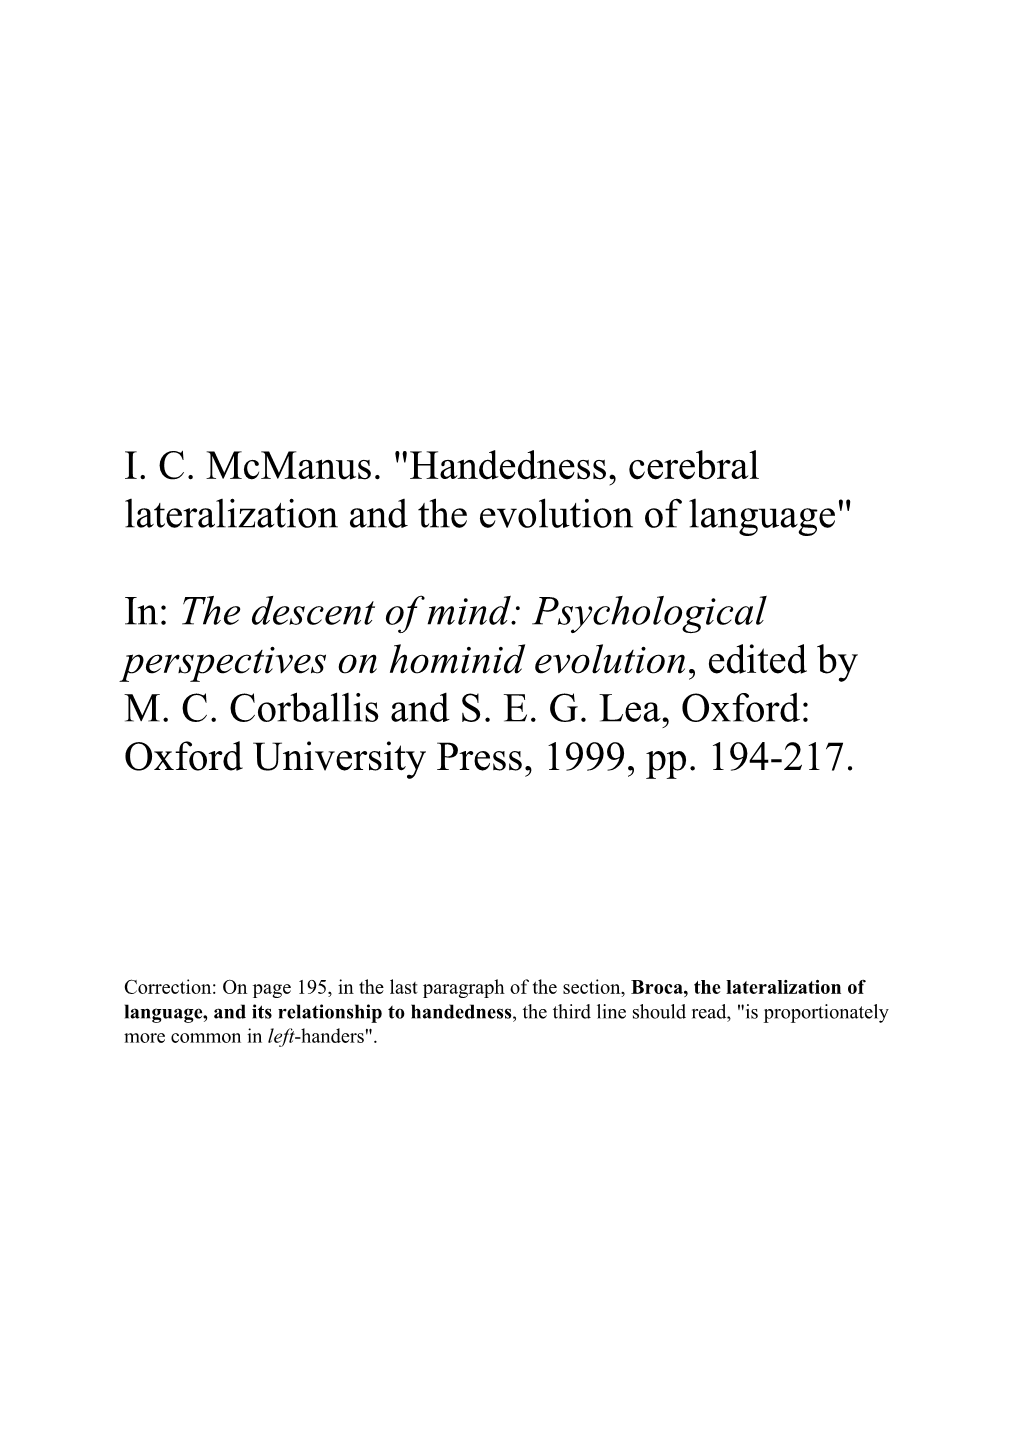 Handedness, Cerebral Lateralization and the Evolution of Language"